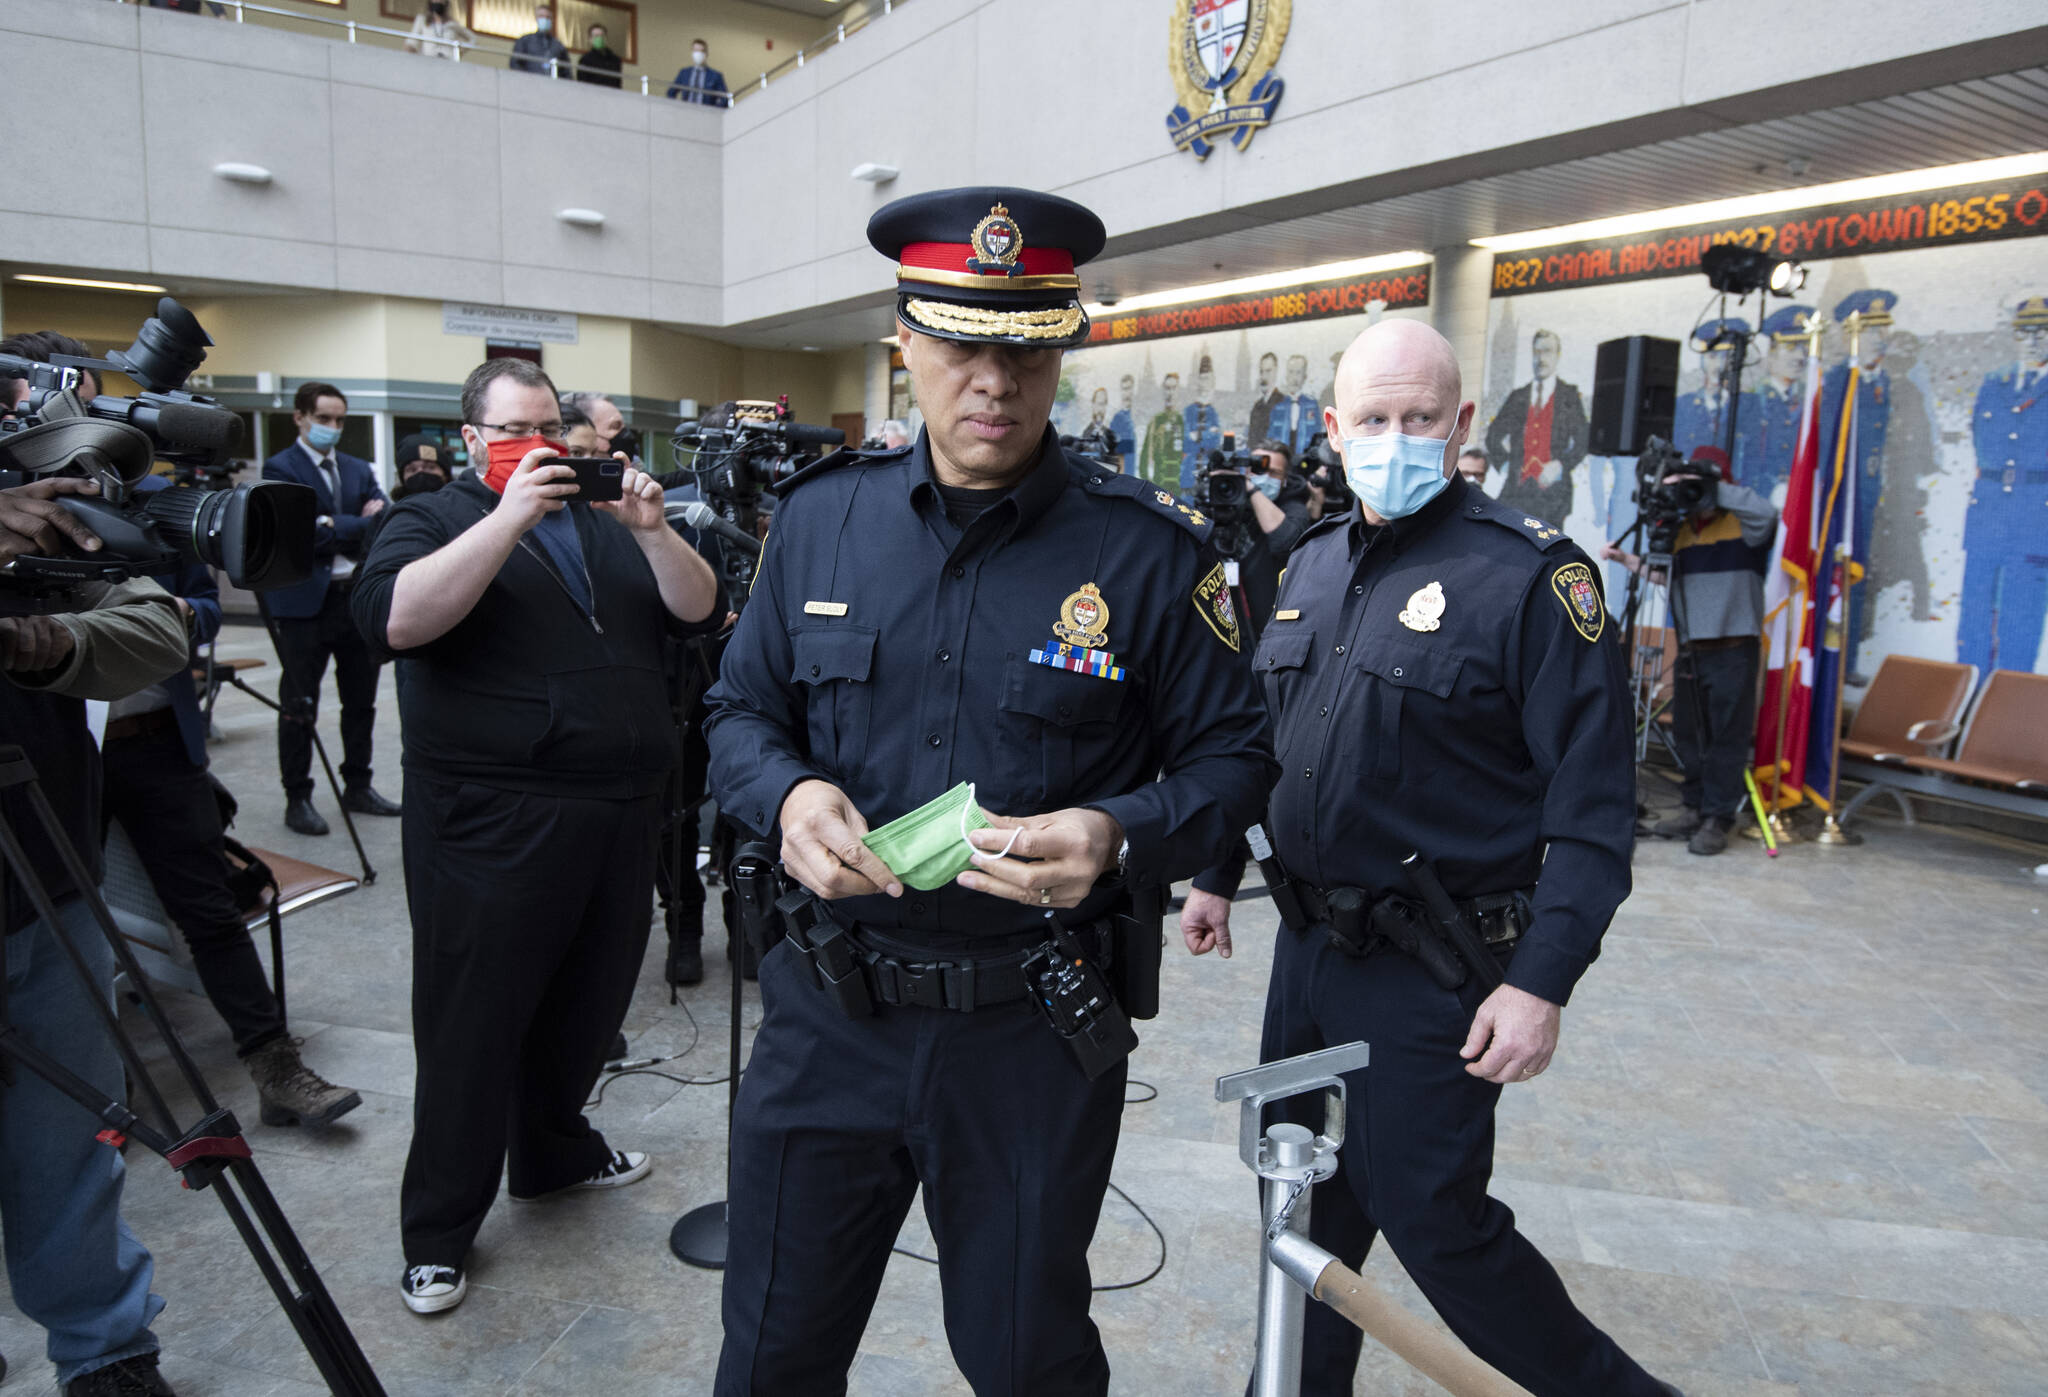 Ottawa Police Chief Peter Sloly leaves after speaking at a news conference on updated enforcement measures as a protest against COVID-19 restrictions continues into its second week, in Ottawa, on Friday, Feb. 4, 2022. THE CANADIAN PRESS/Justin Tang